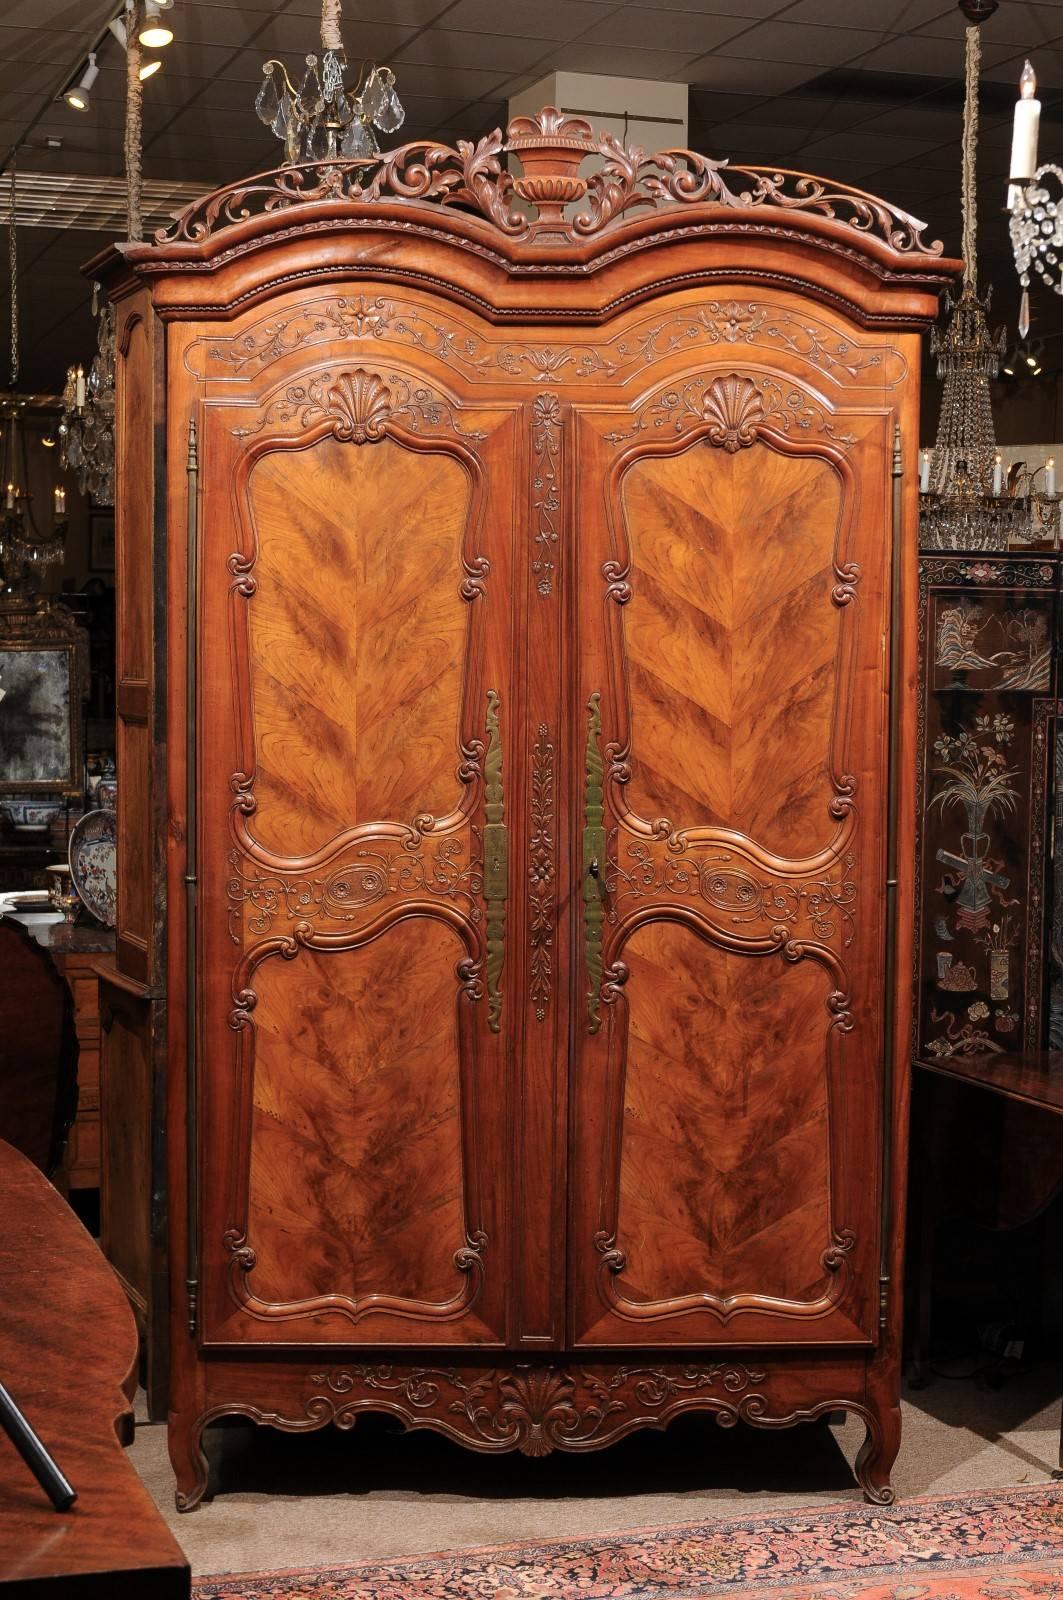 Fruitwood armoire in the Renaissance style with double bonnet top and carved apron, France 19th century.